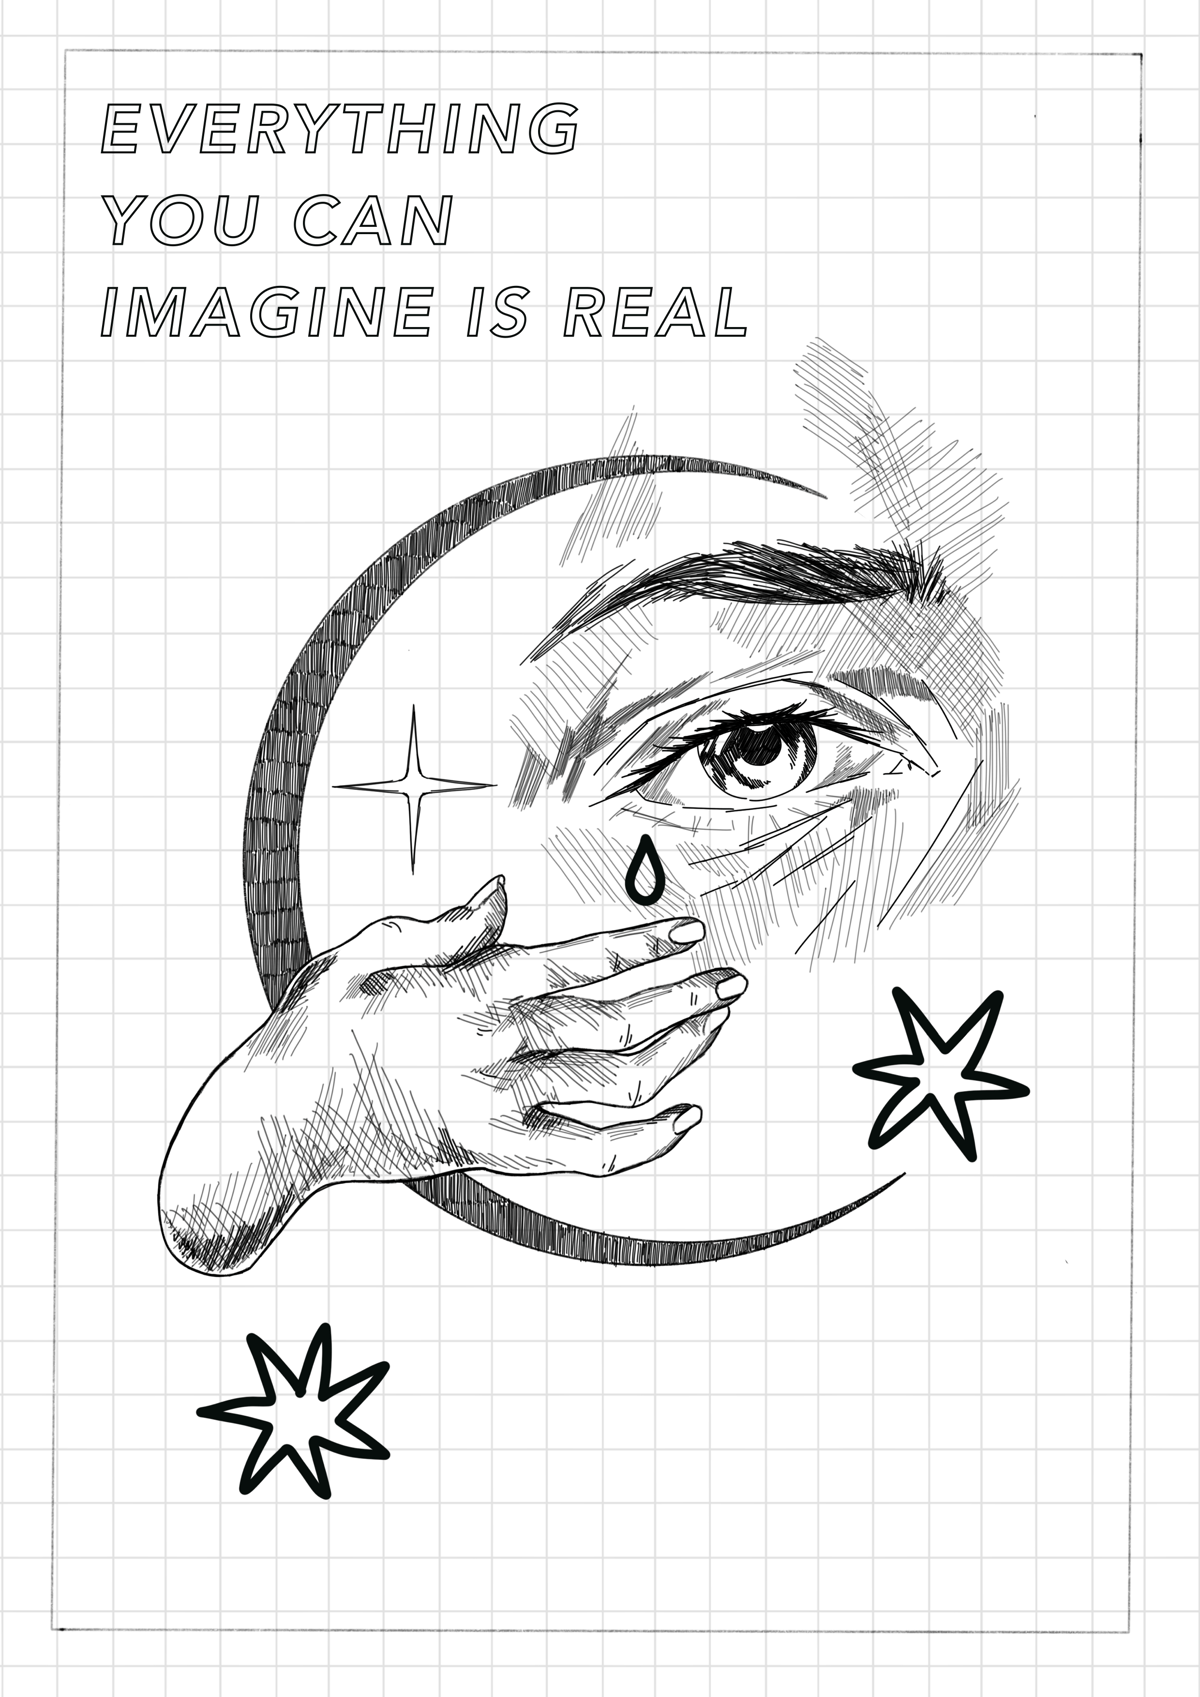 Image of Everything is real print